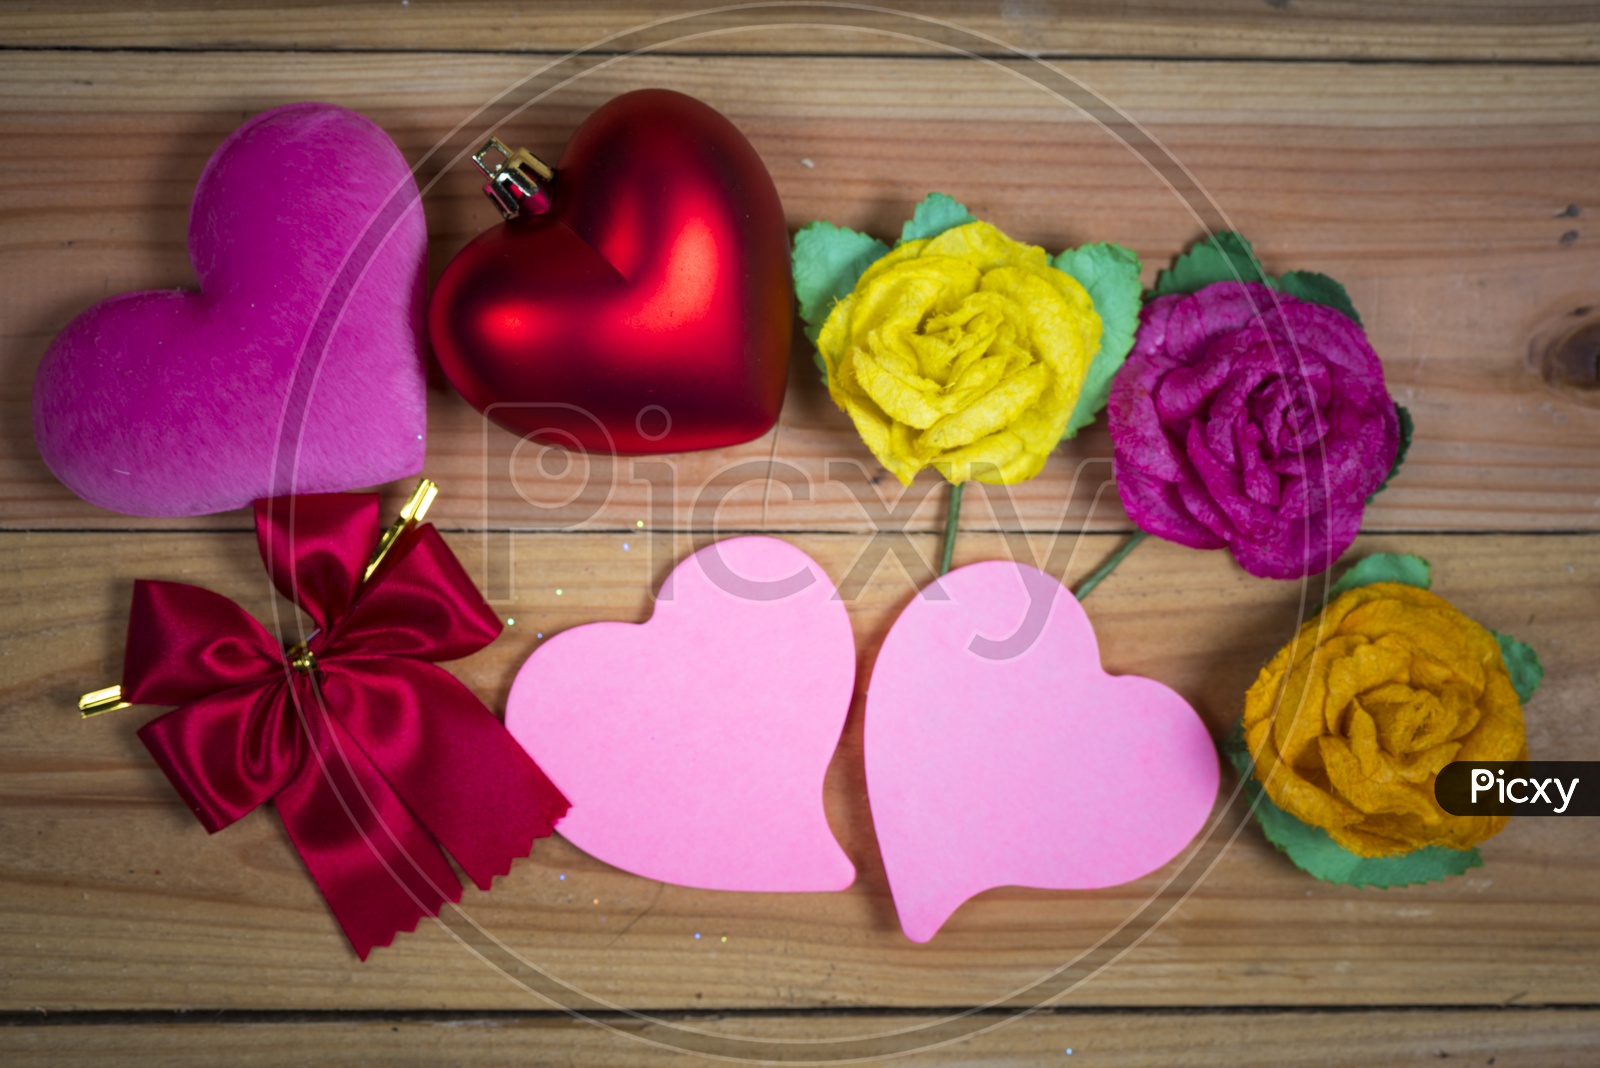 Artistic Background For valentines Day With Crafts And Spacing For text